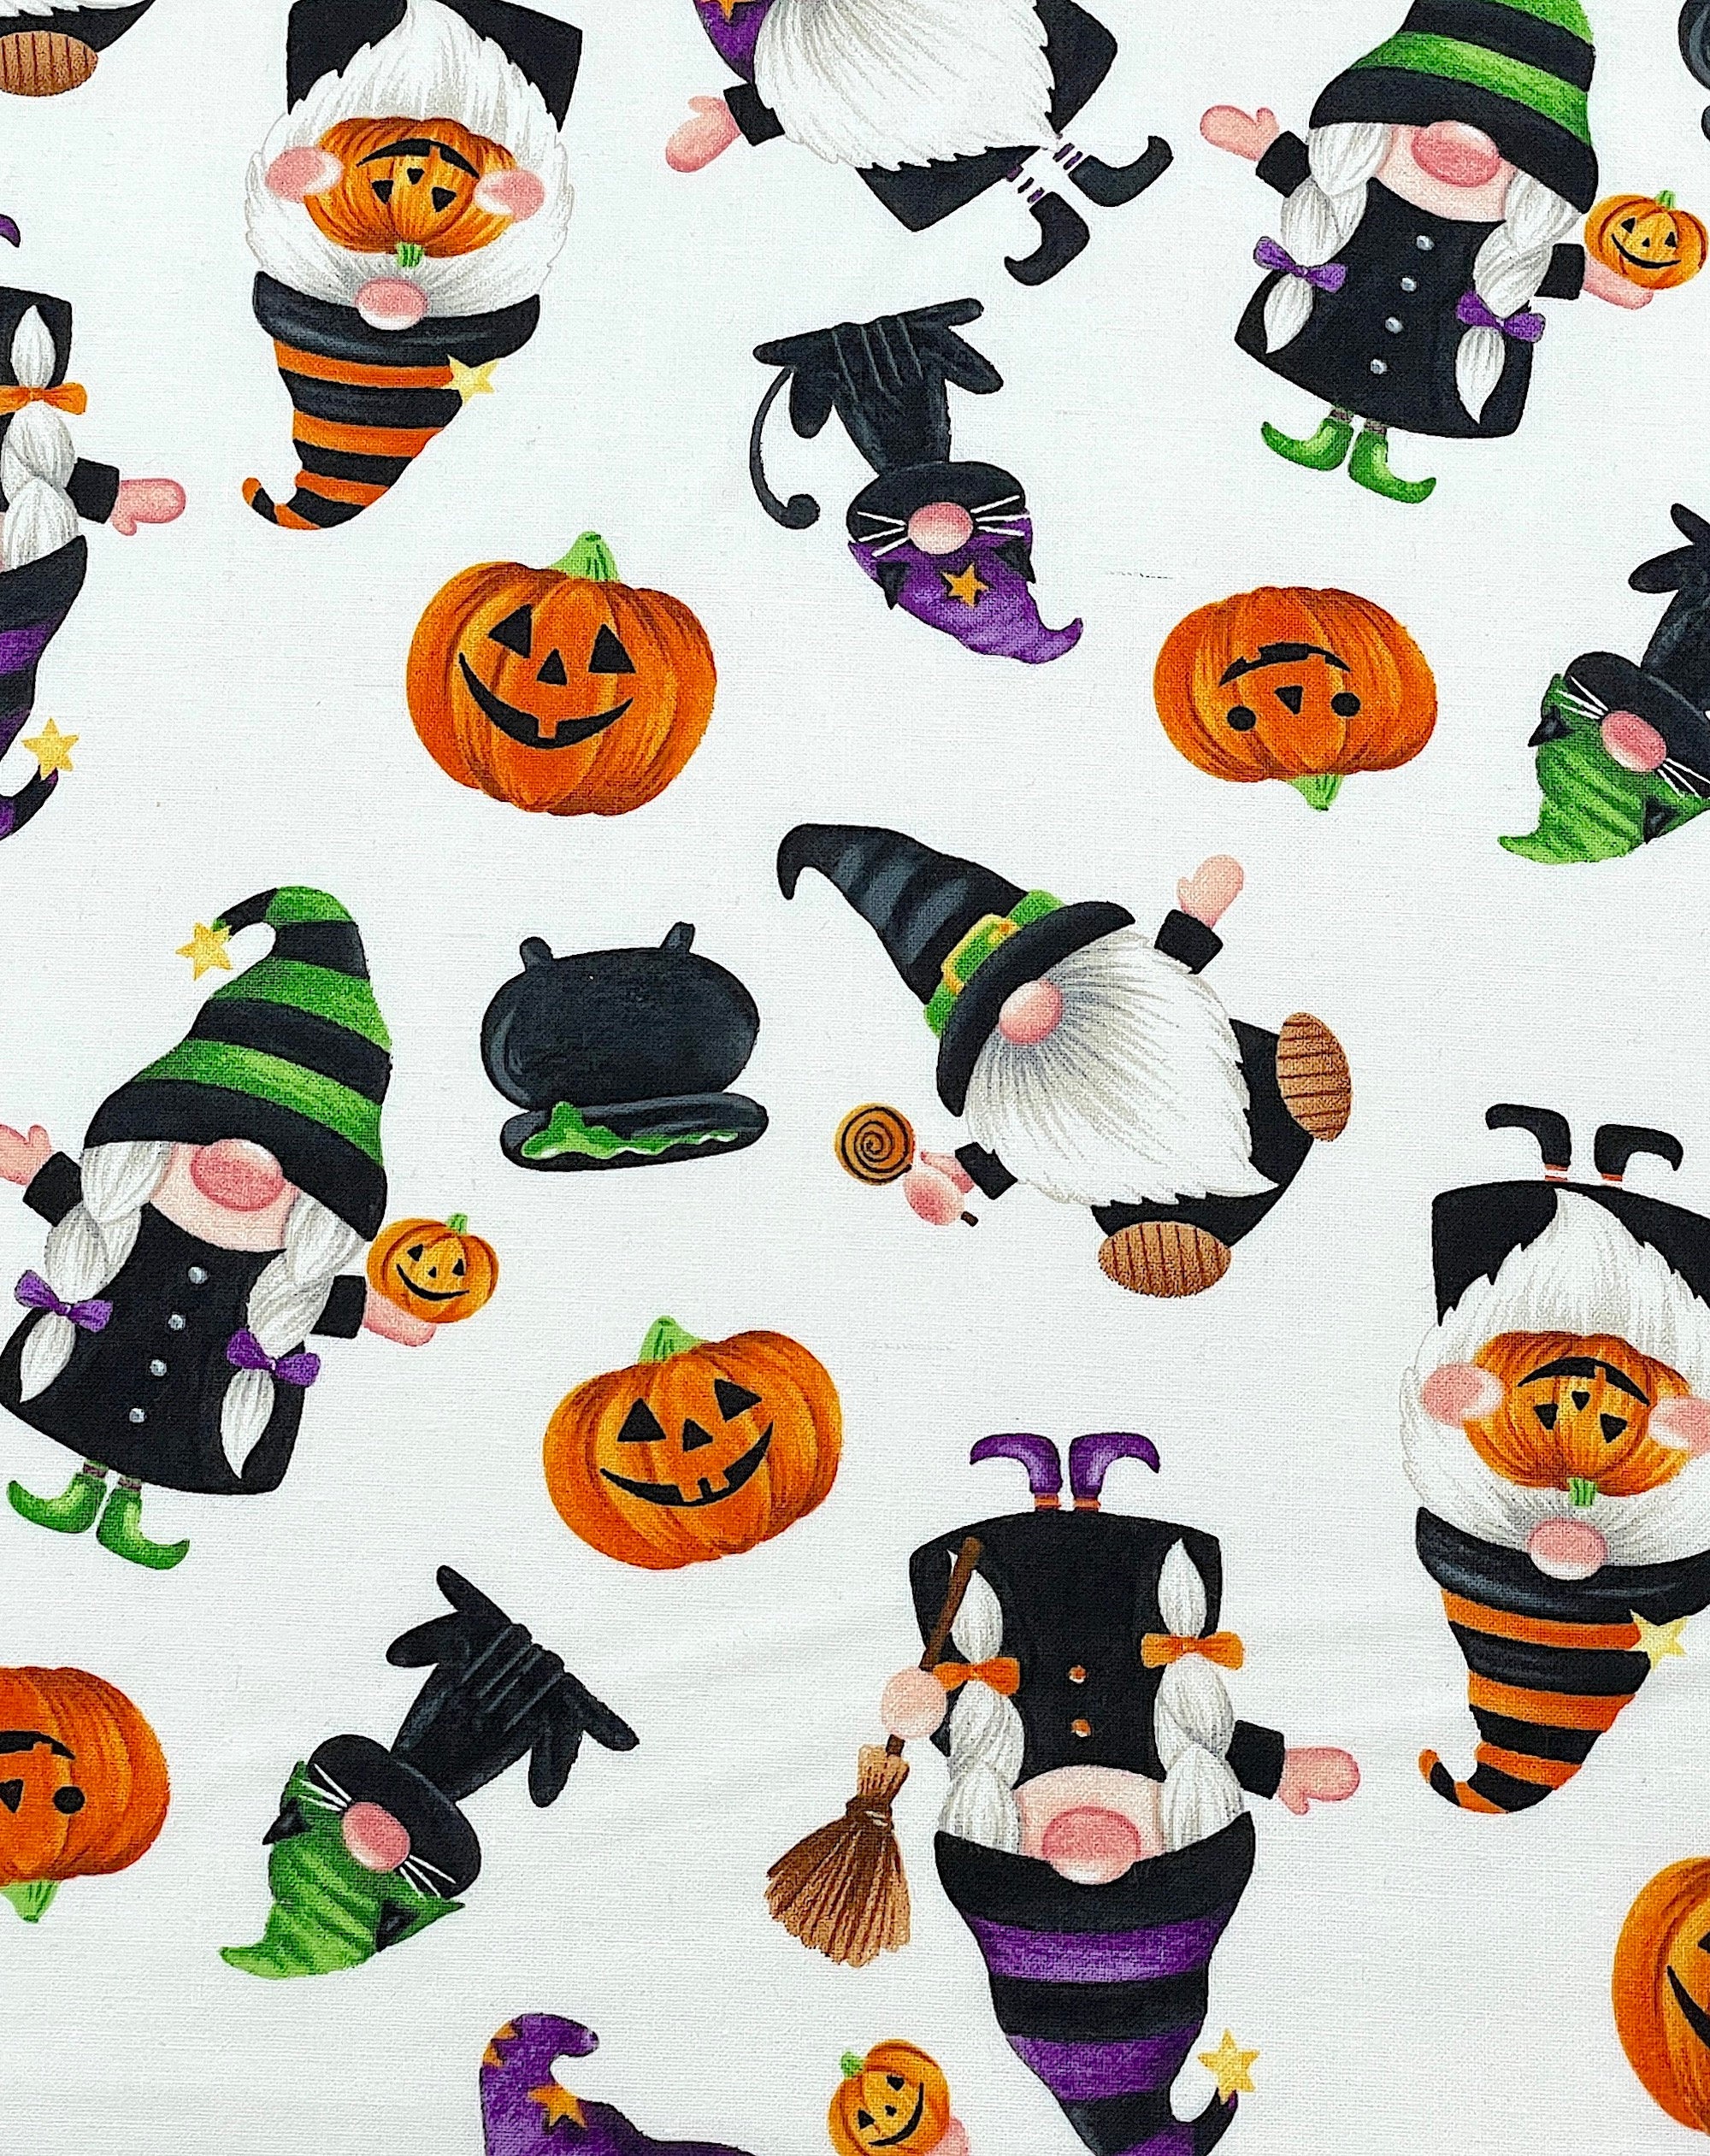 This white cotton fabric is covered with gnomes, black cats, kettles and pumpkins. The gnomes are holding pumpkins or brooms.